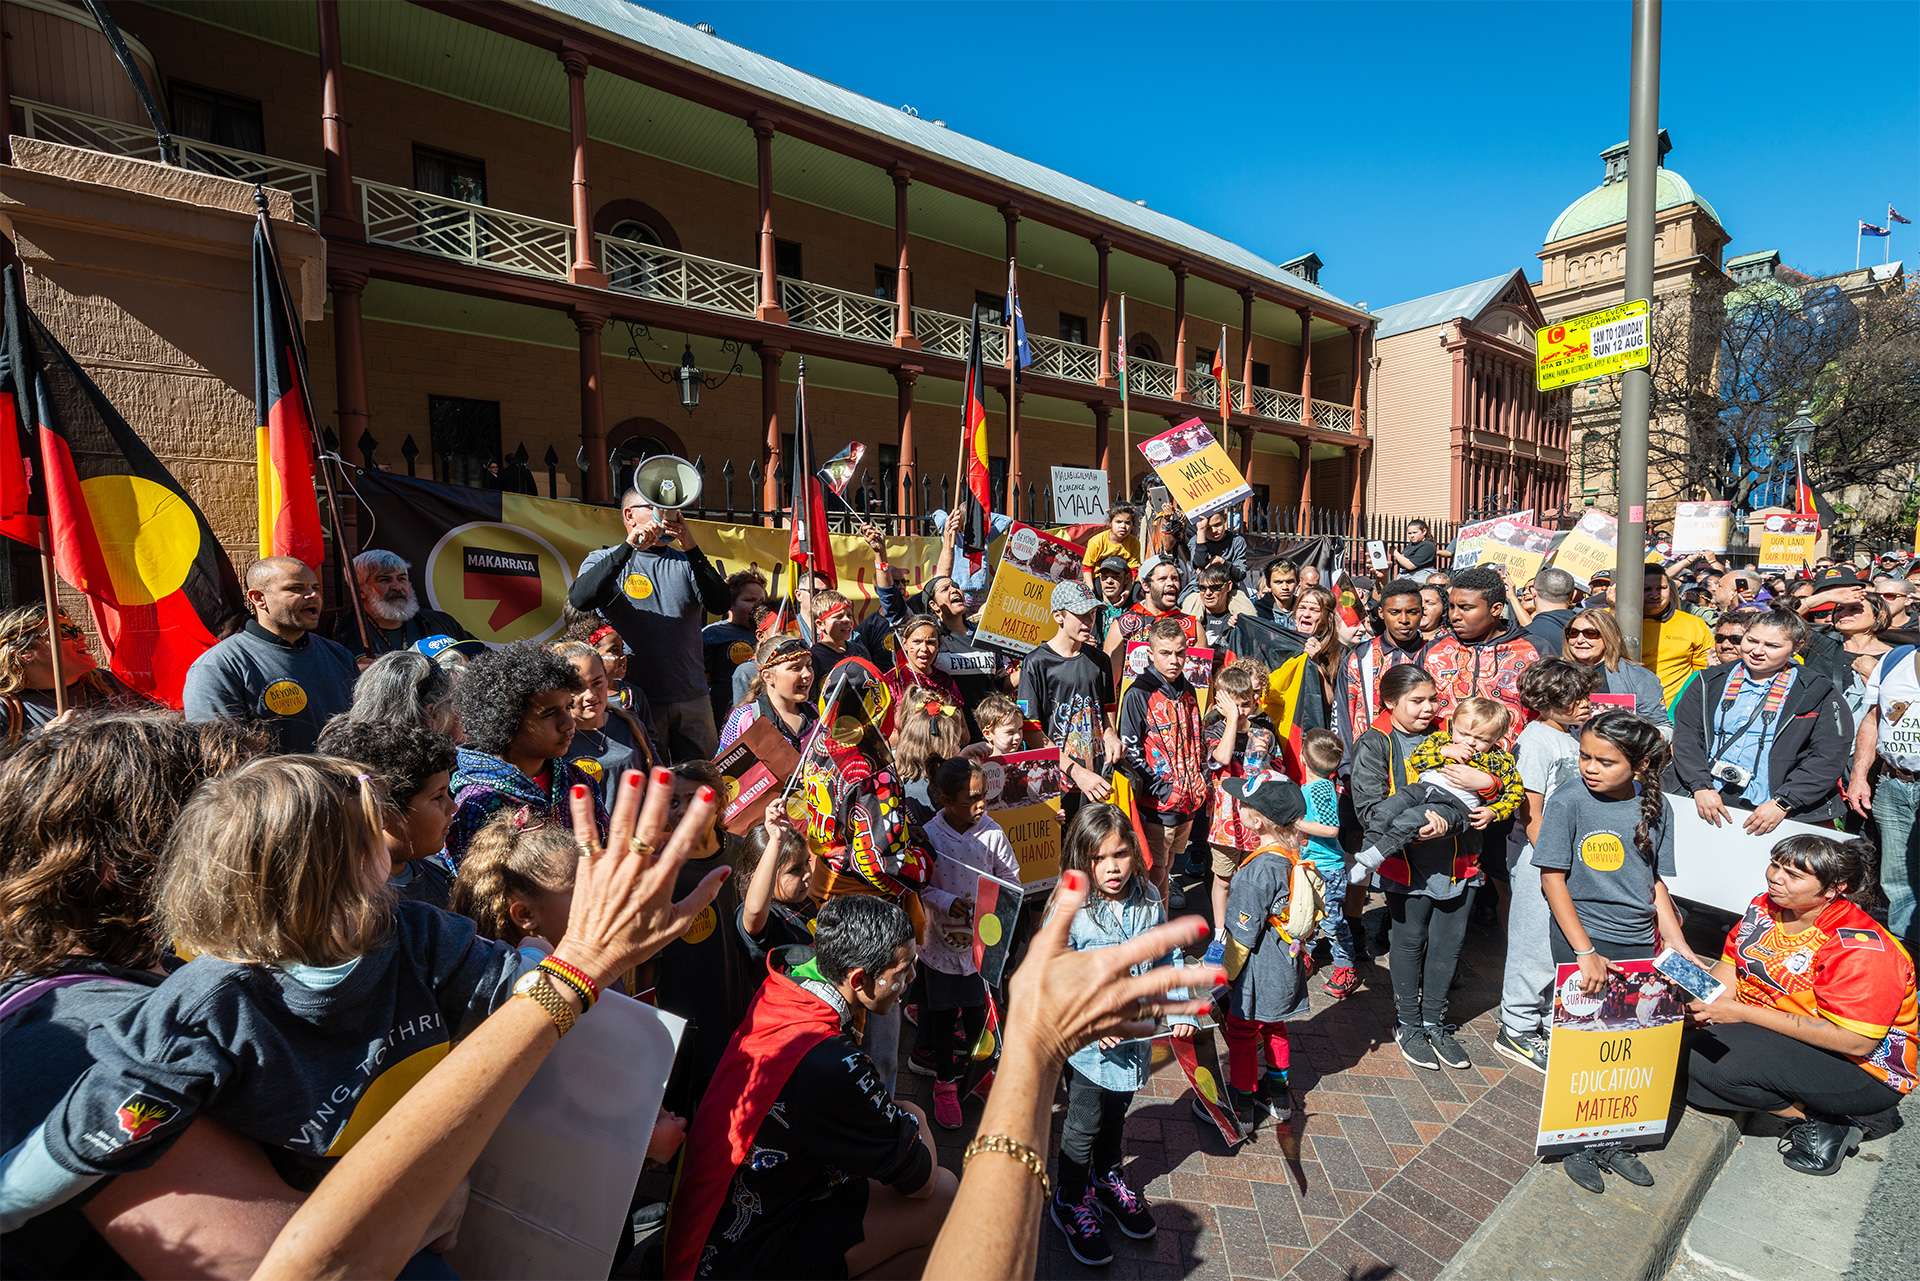 Sydney, NSW, AUSTRALIA - August 9, 2018: Indigenous rights protesters from all over New South Wales gather outside the NSW Parliament House, Sydney, on World’s Indigenous Peoples Day.